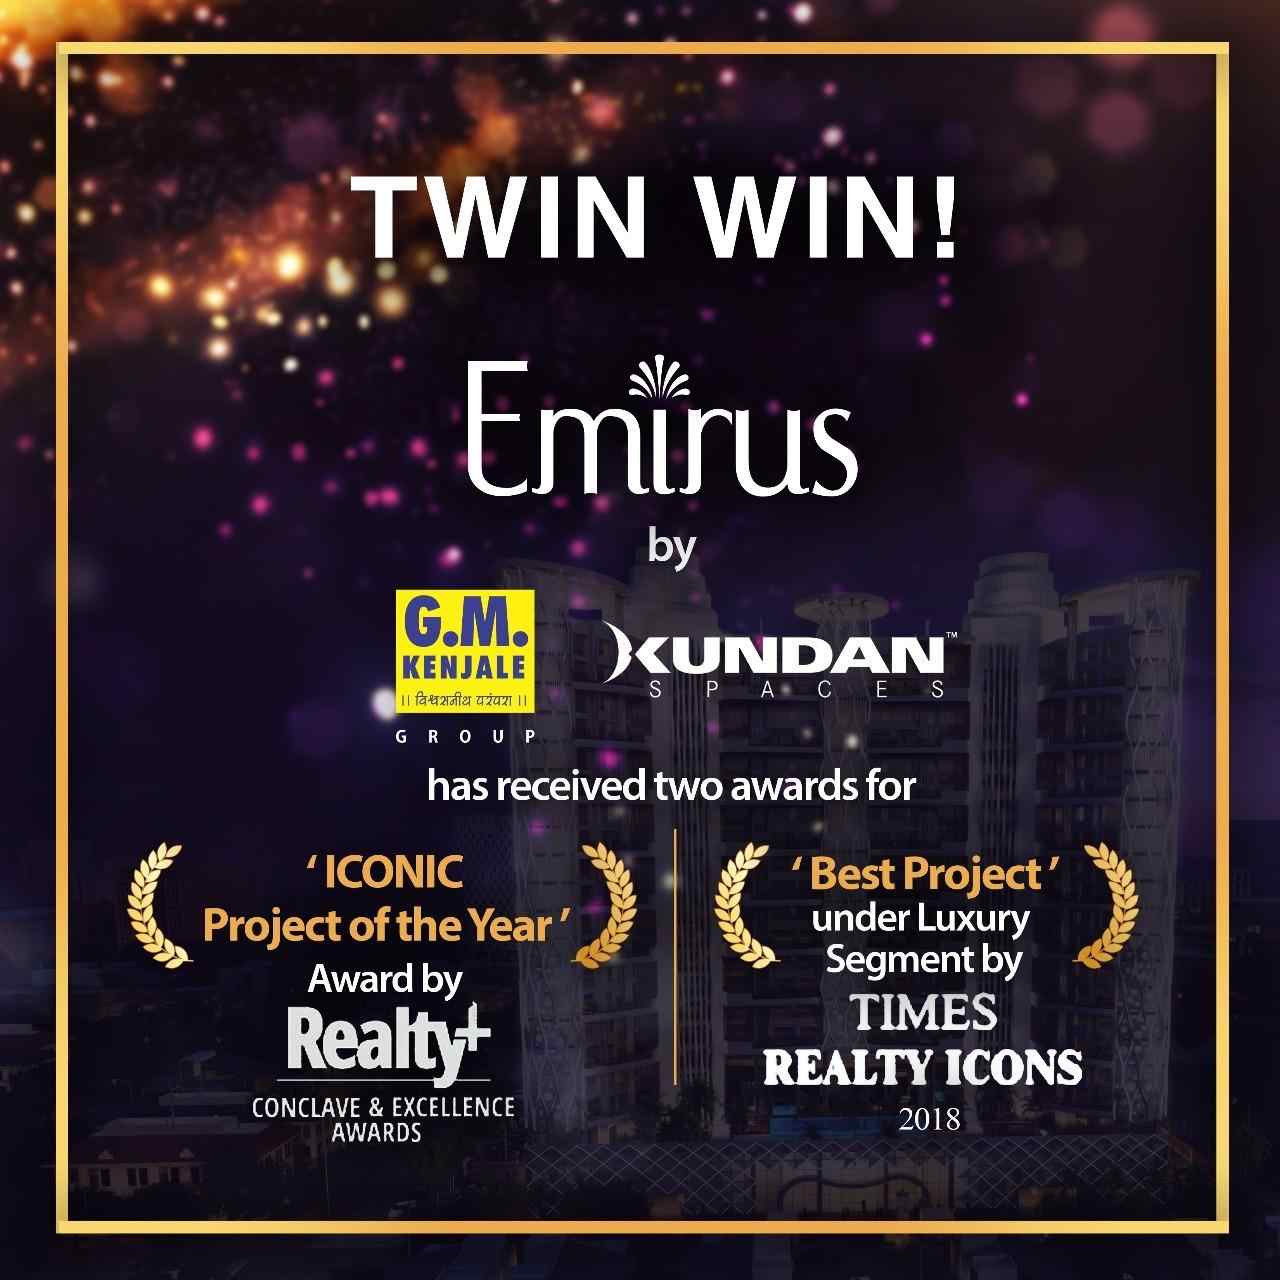 Emirus by Kundan Spaces awarded Iconic Project of the Year & Best Project under luxury segment 2018 Update